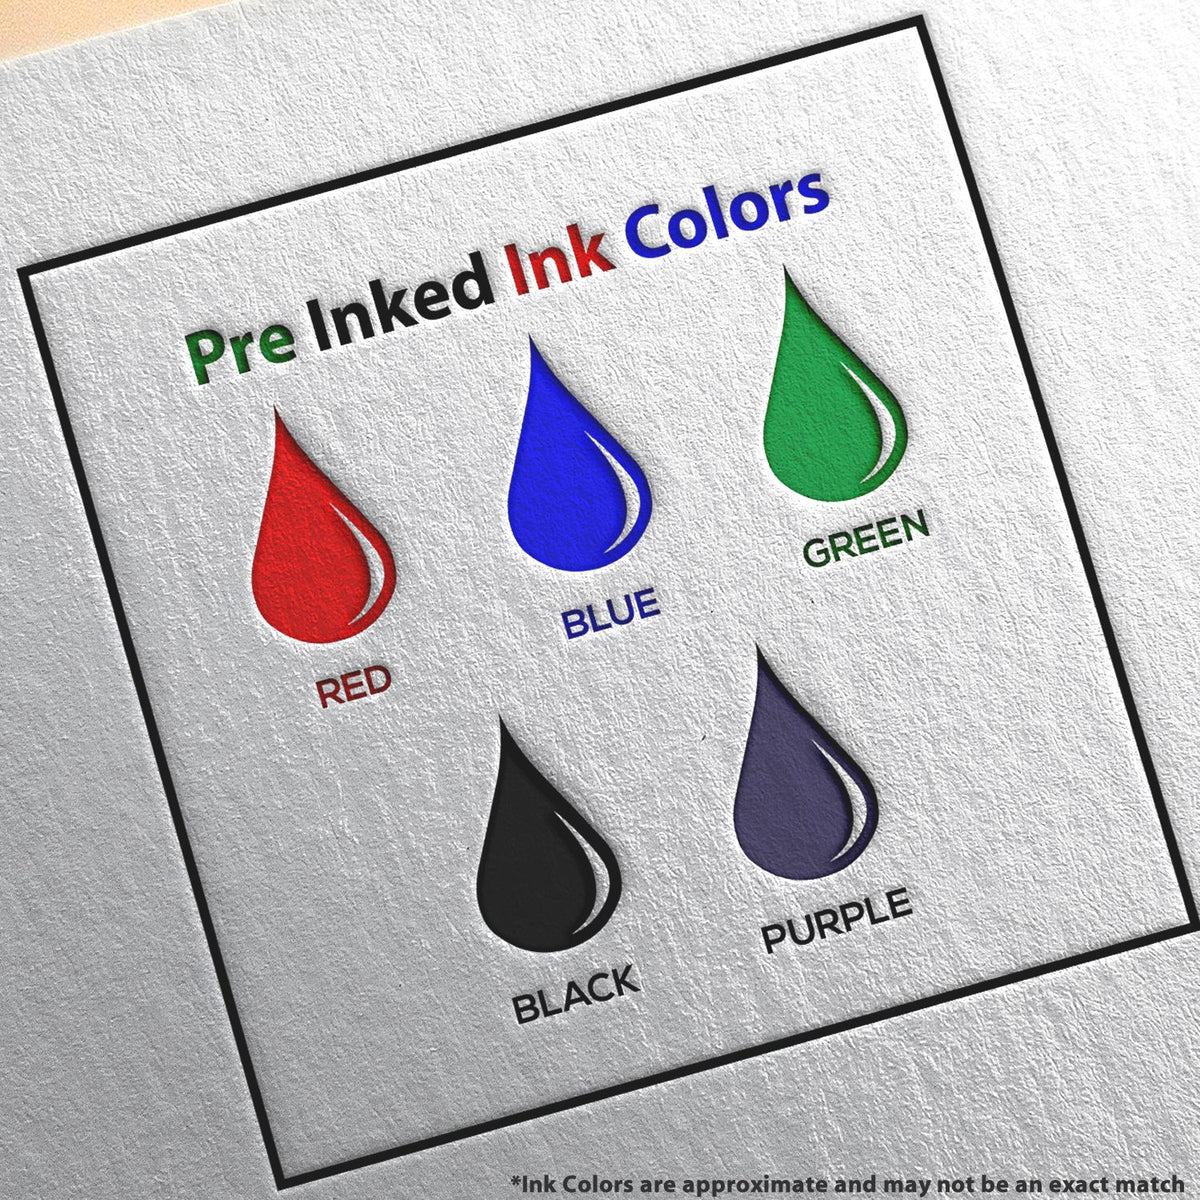 A picture showing the different ink colors or hues available for the Slim Pre-Inked New York Architect Seal Stamp product.